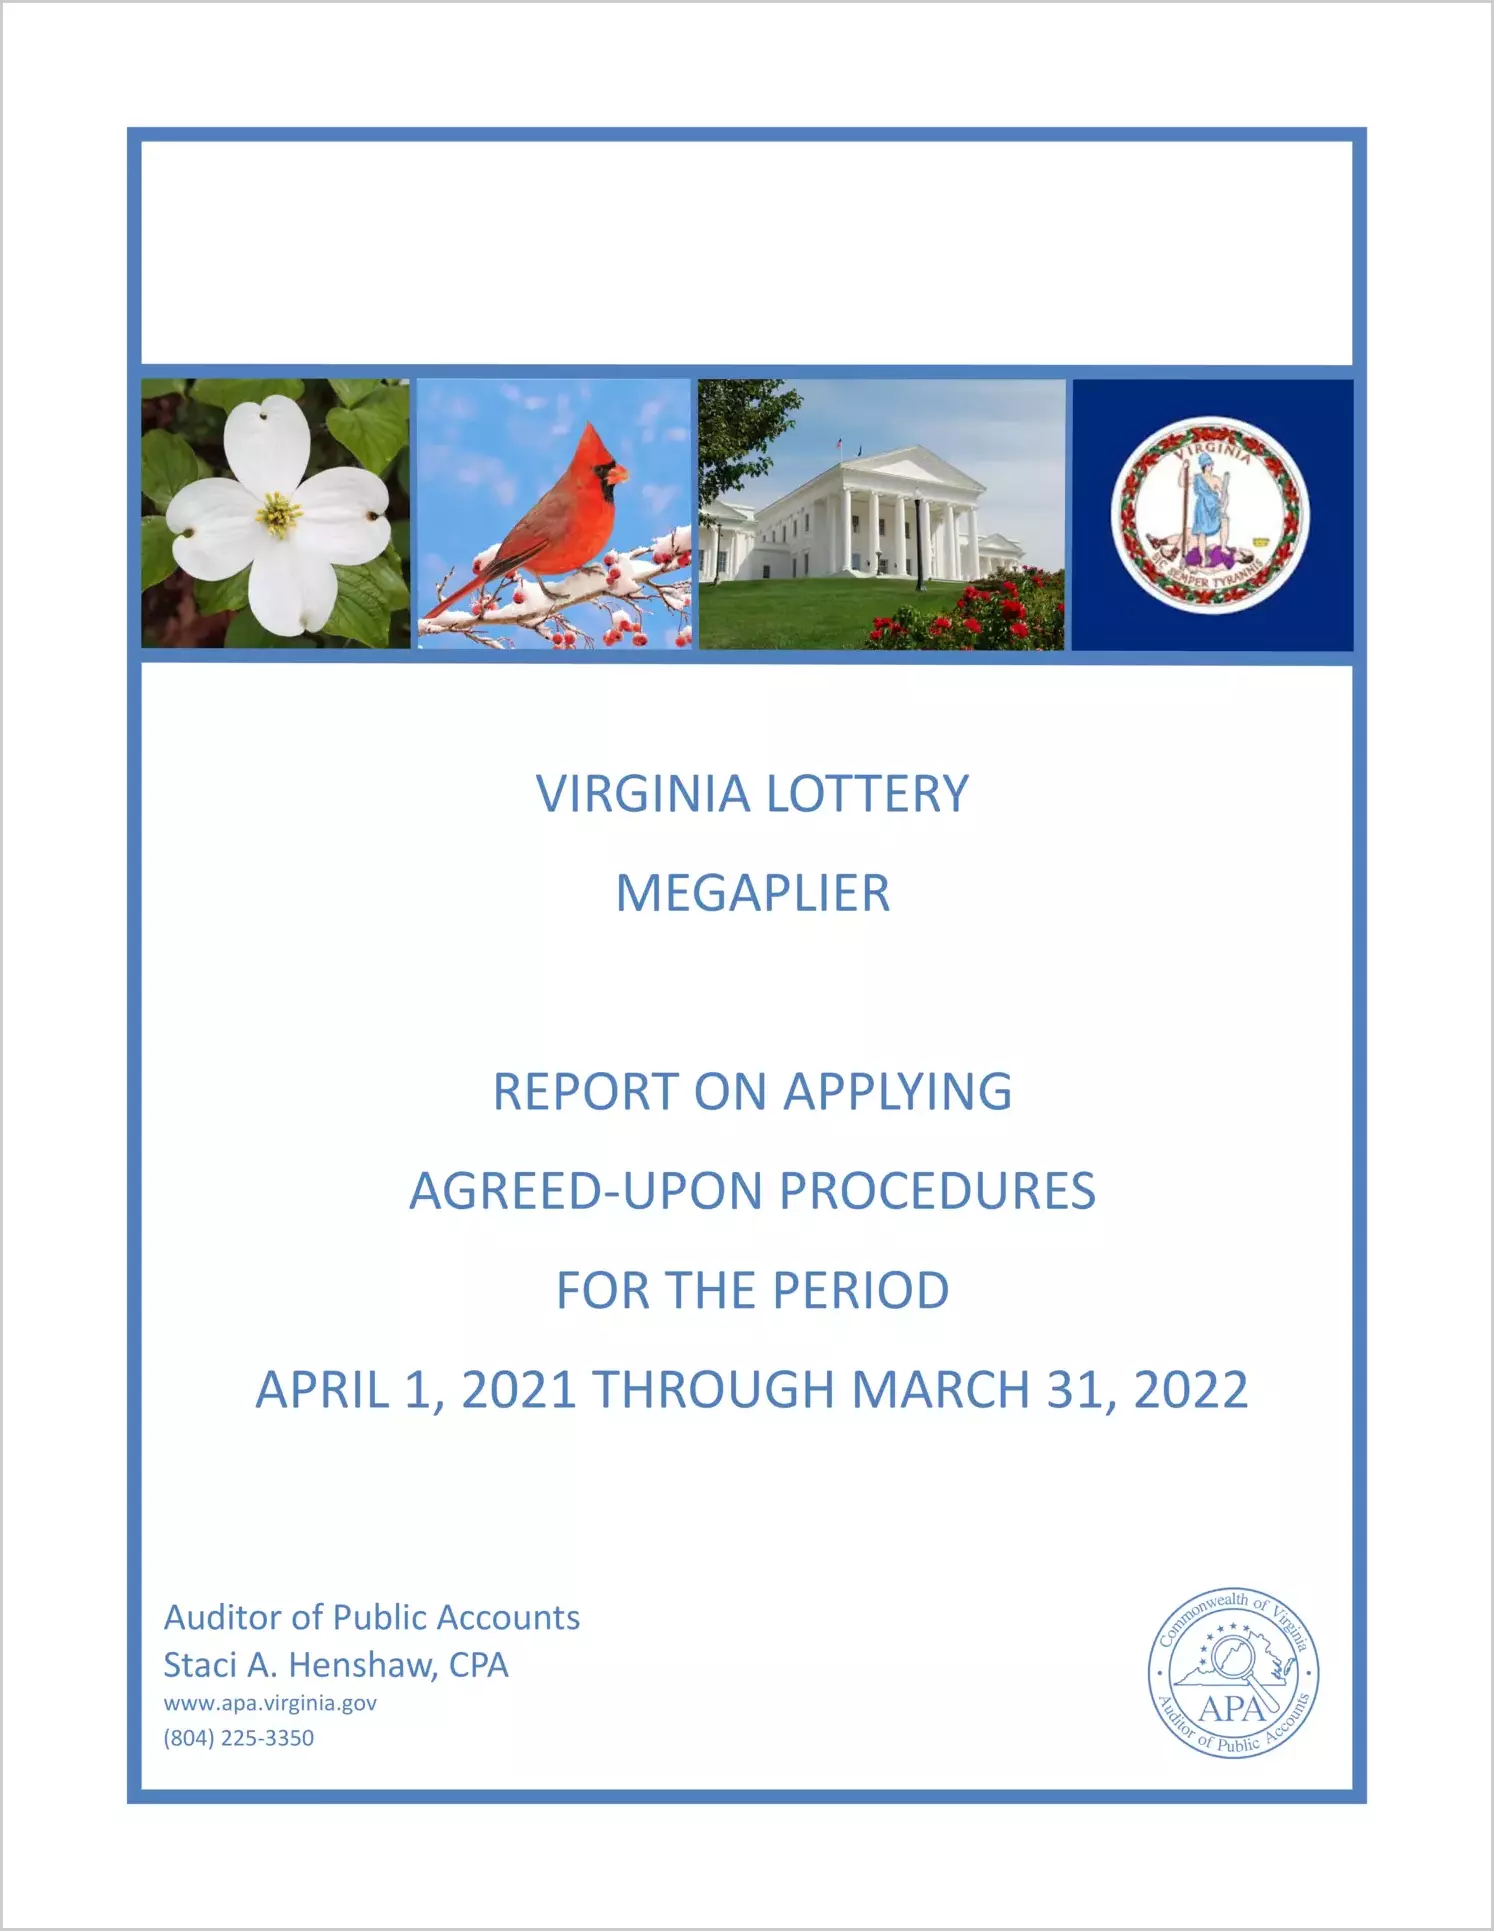 Virginia Lottery Megaplier Report on Applying Agreed-Upon Procedures for the period April 1, 2021 through March 31, 2022